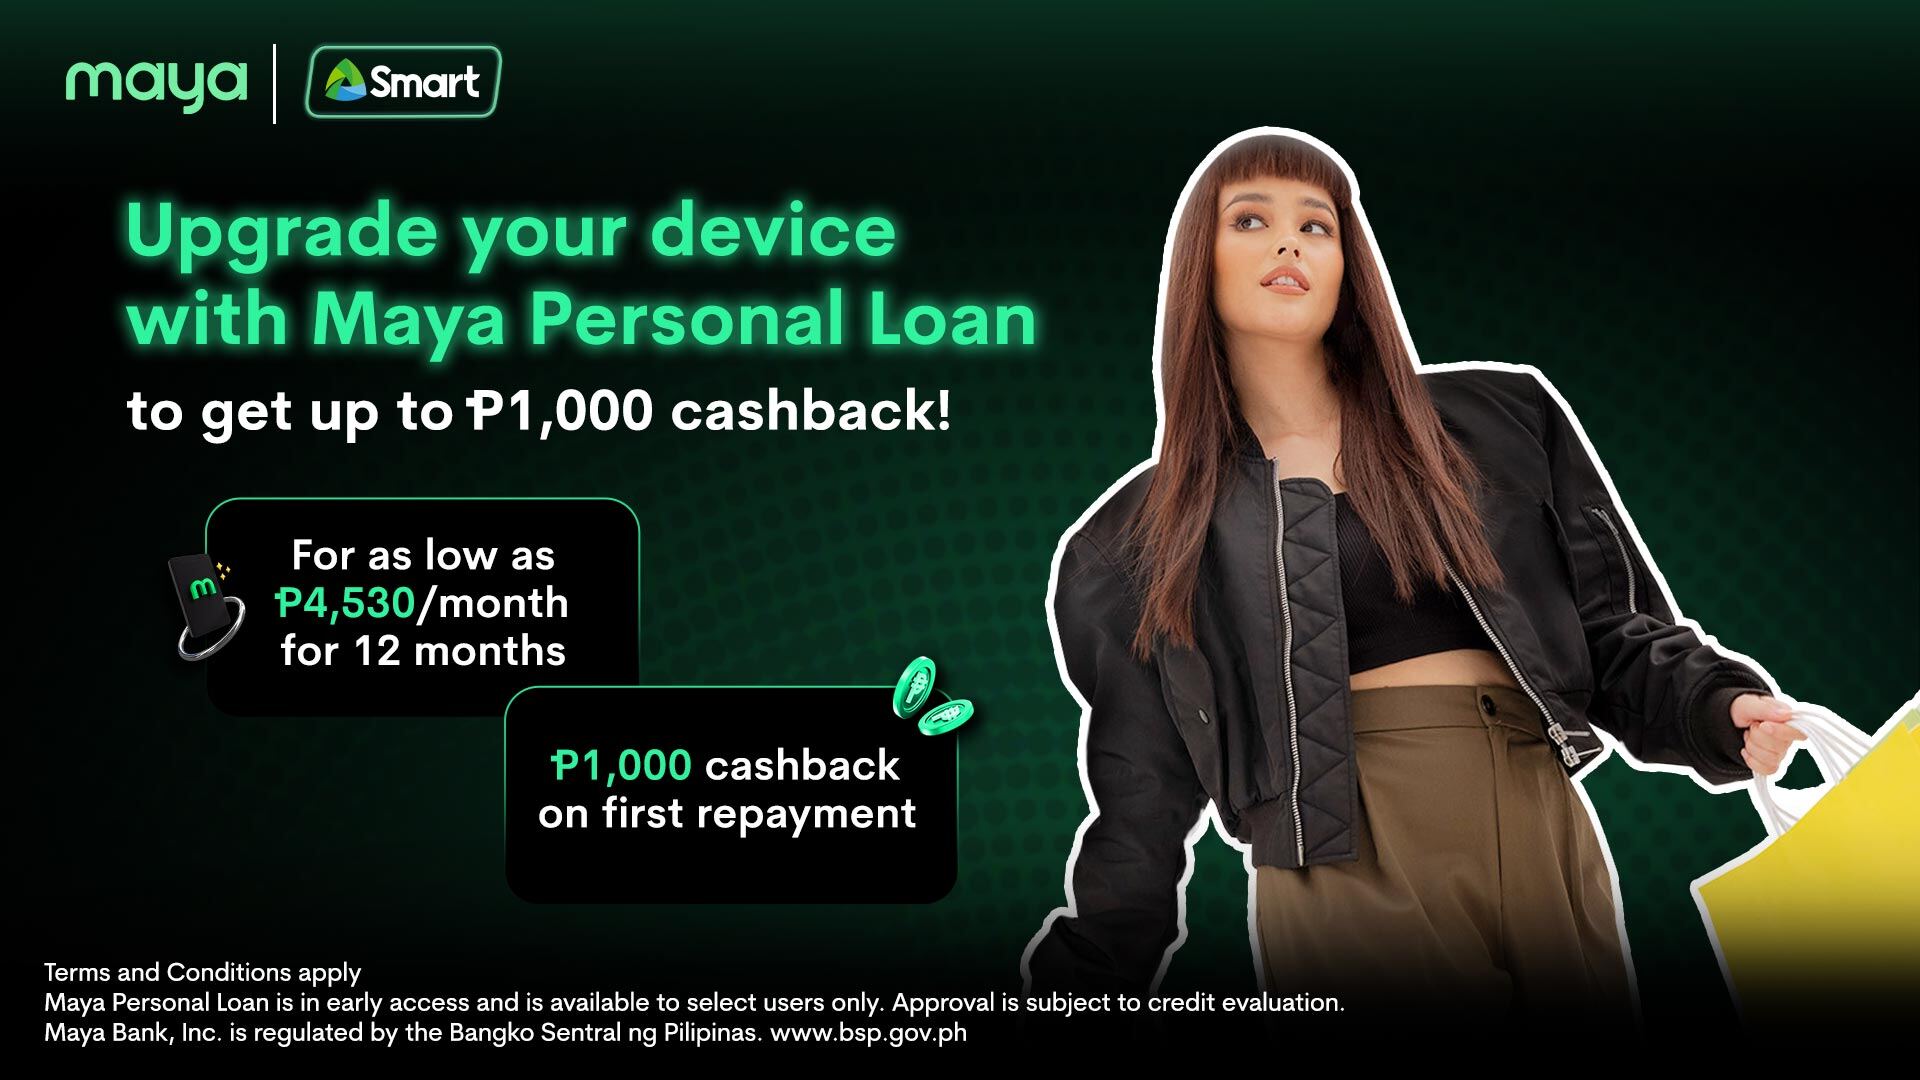 Get up to ₱1,000 cashback with SMART and Maya Personal Loan!